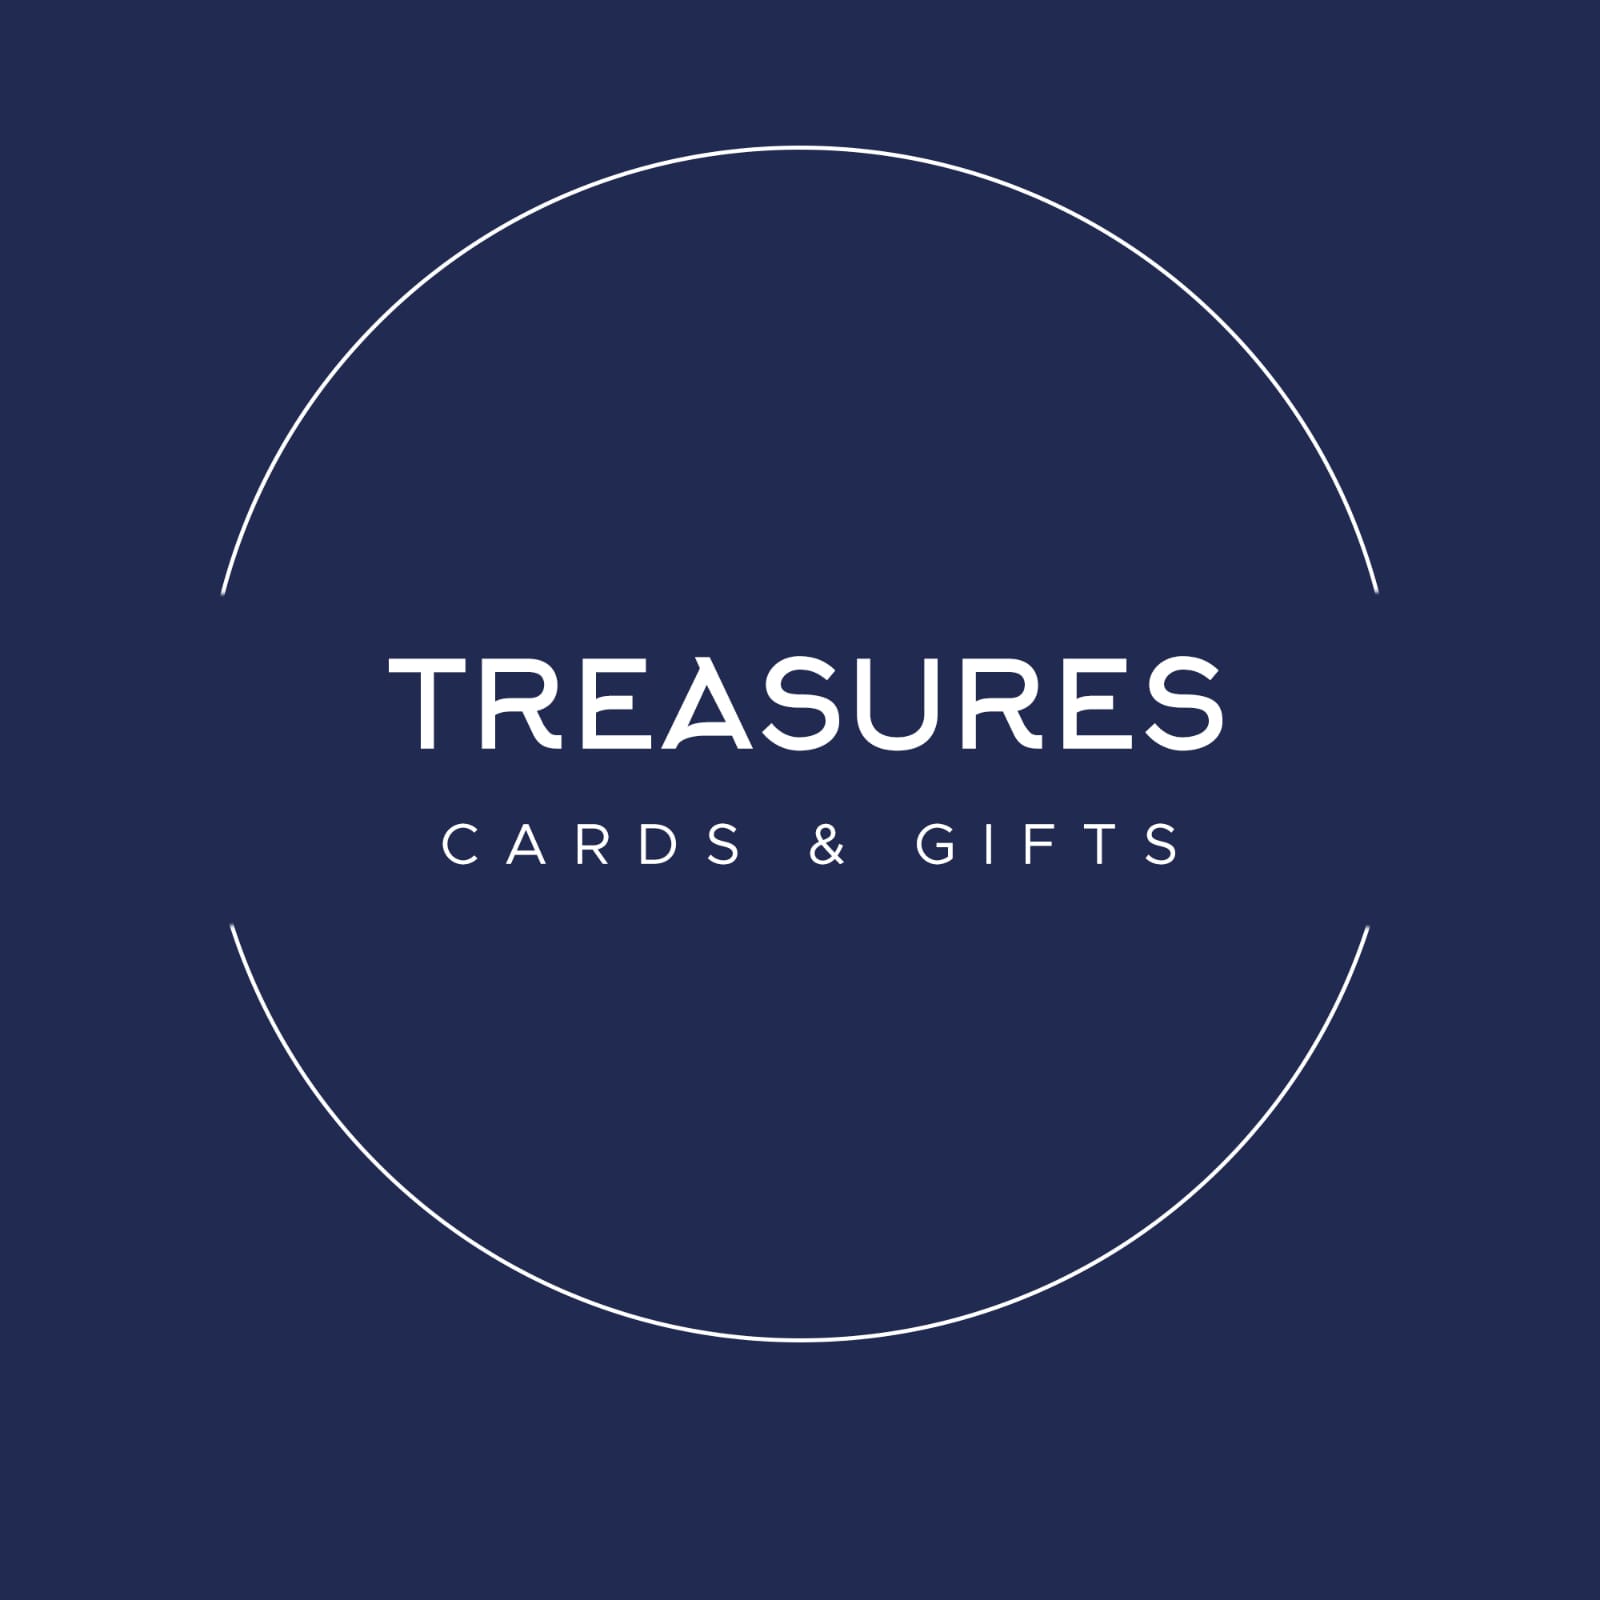 Treasures Cards and Gifts